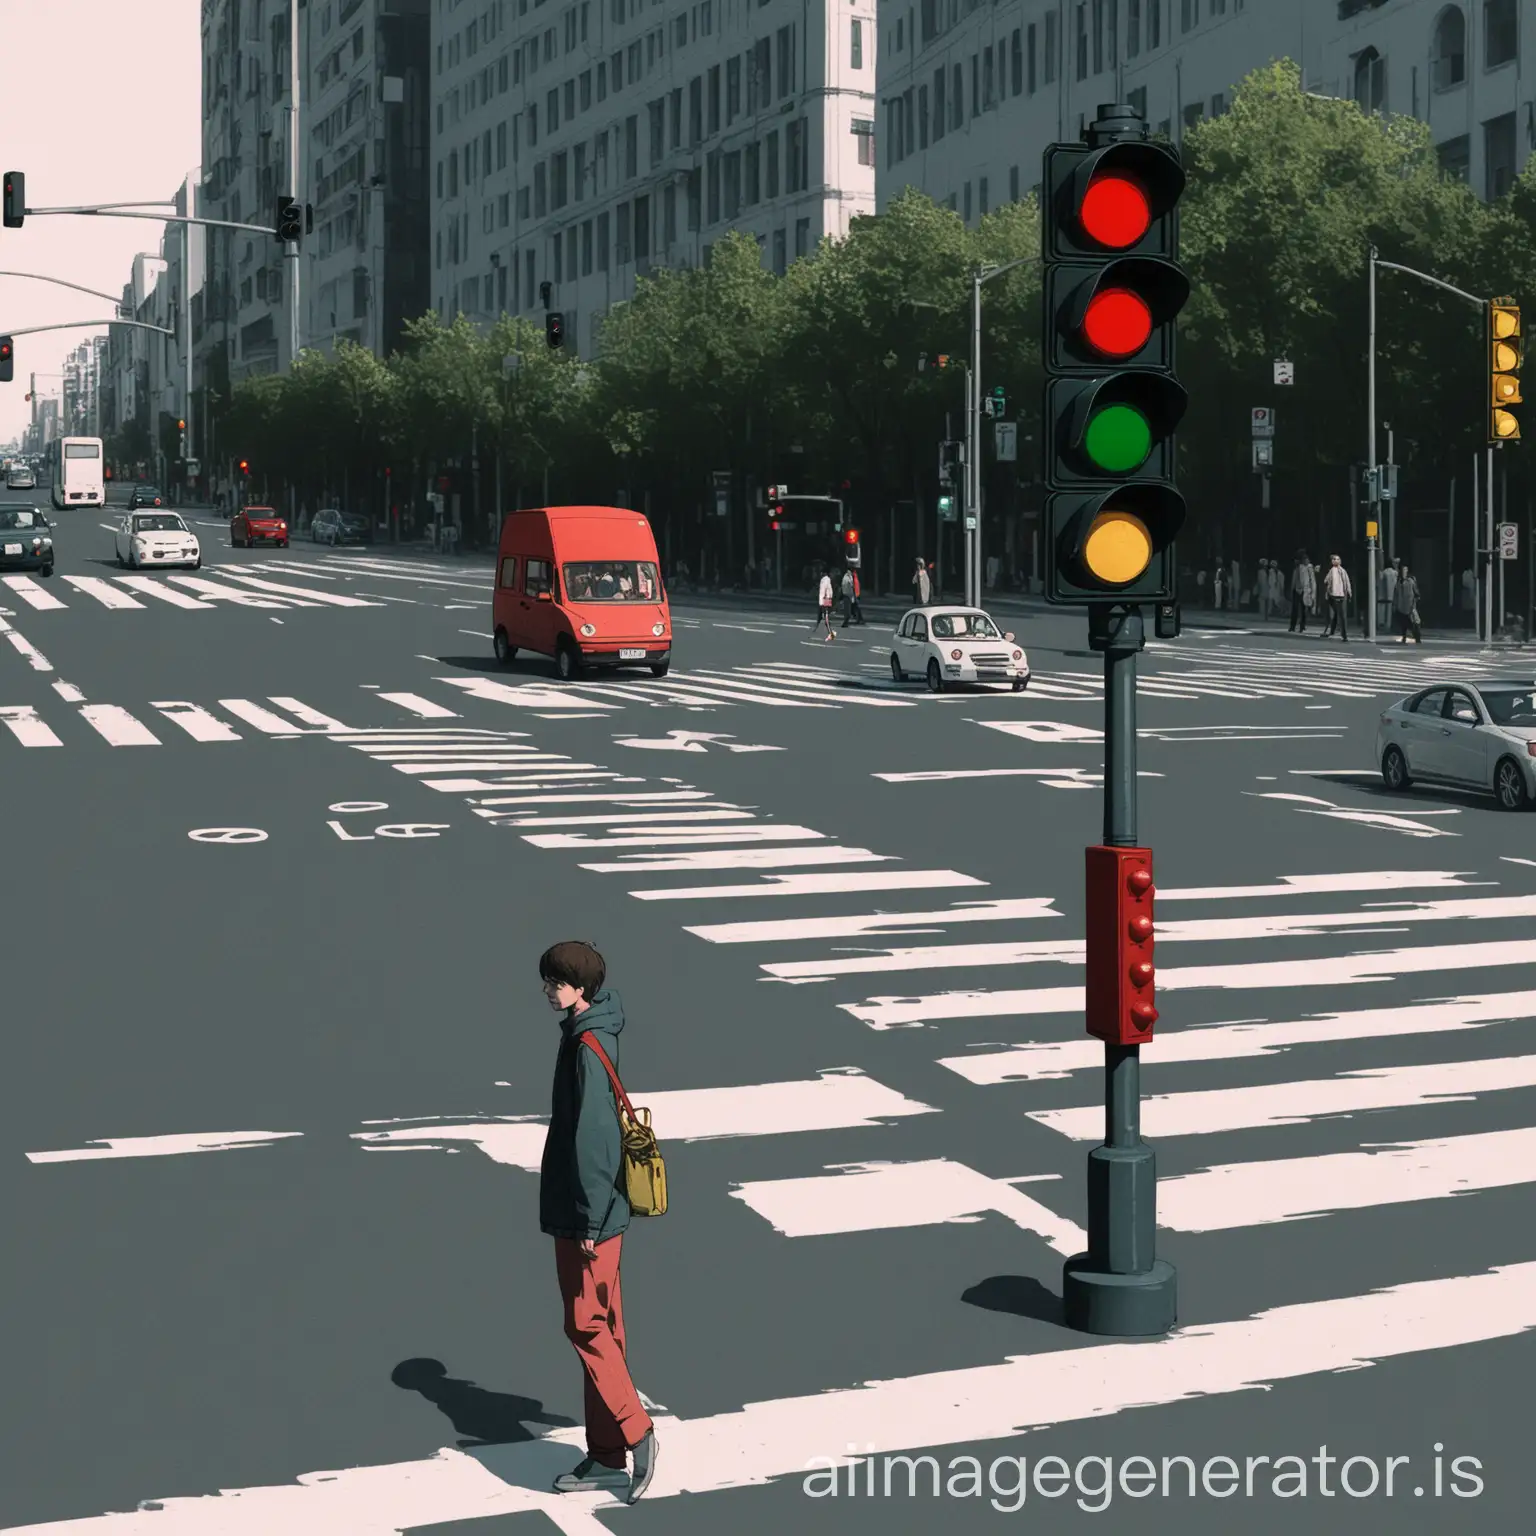 Urban-Scene-Pedestrian-Waiting-at-Red-Light-with-Cars-on-the-Road